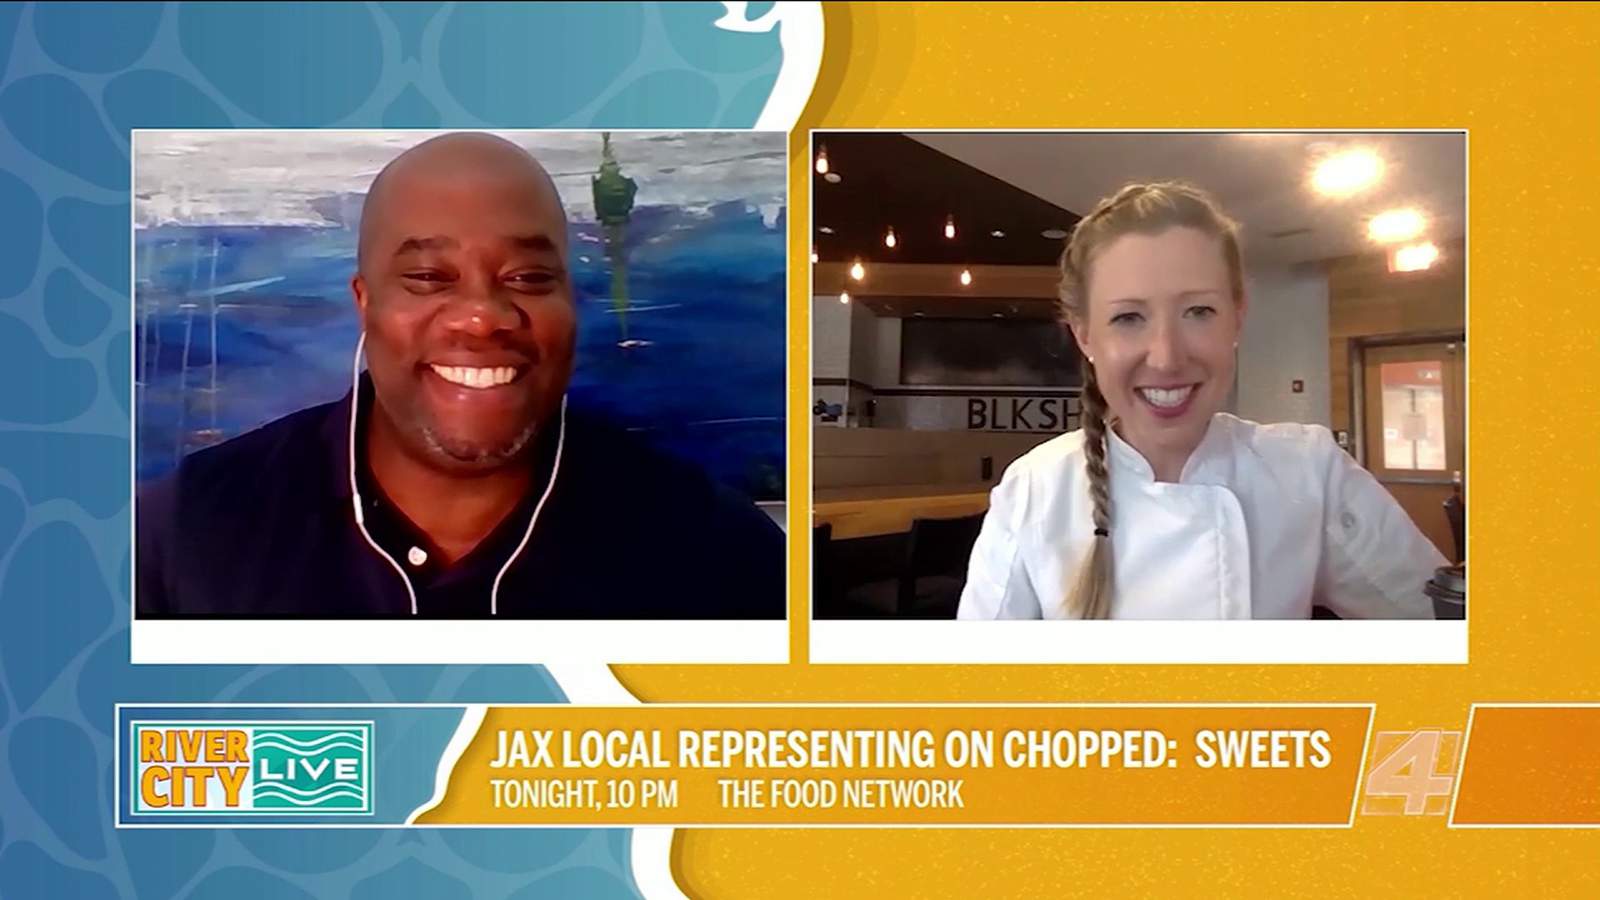 Jax Local On Hit Show Chopped: Sweets | River City Live